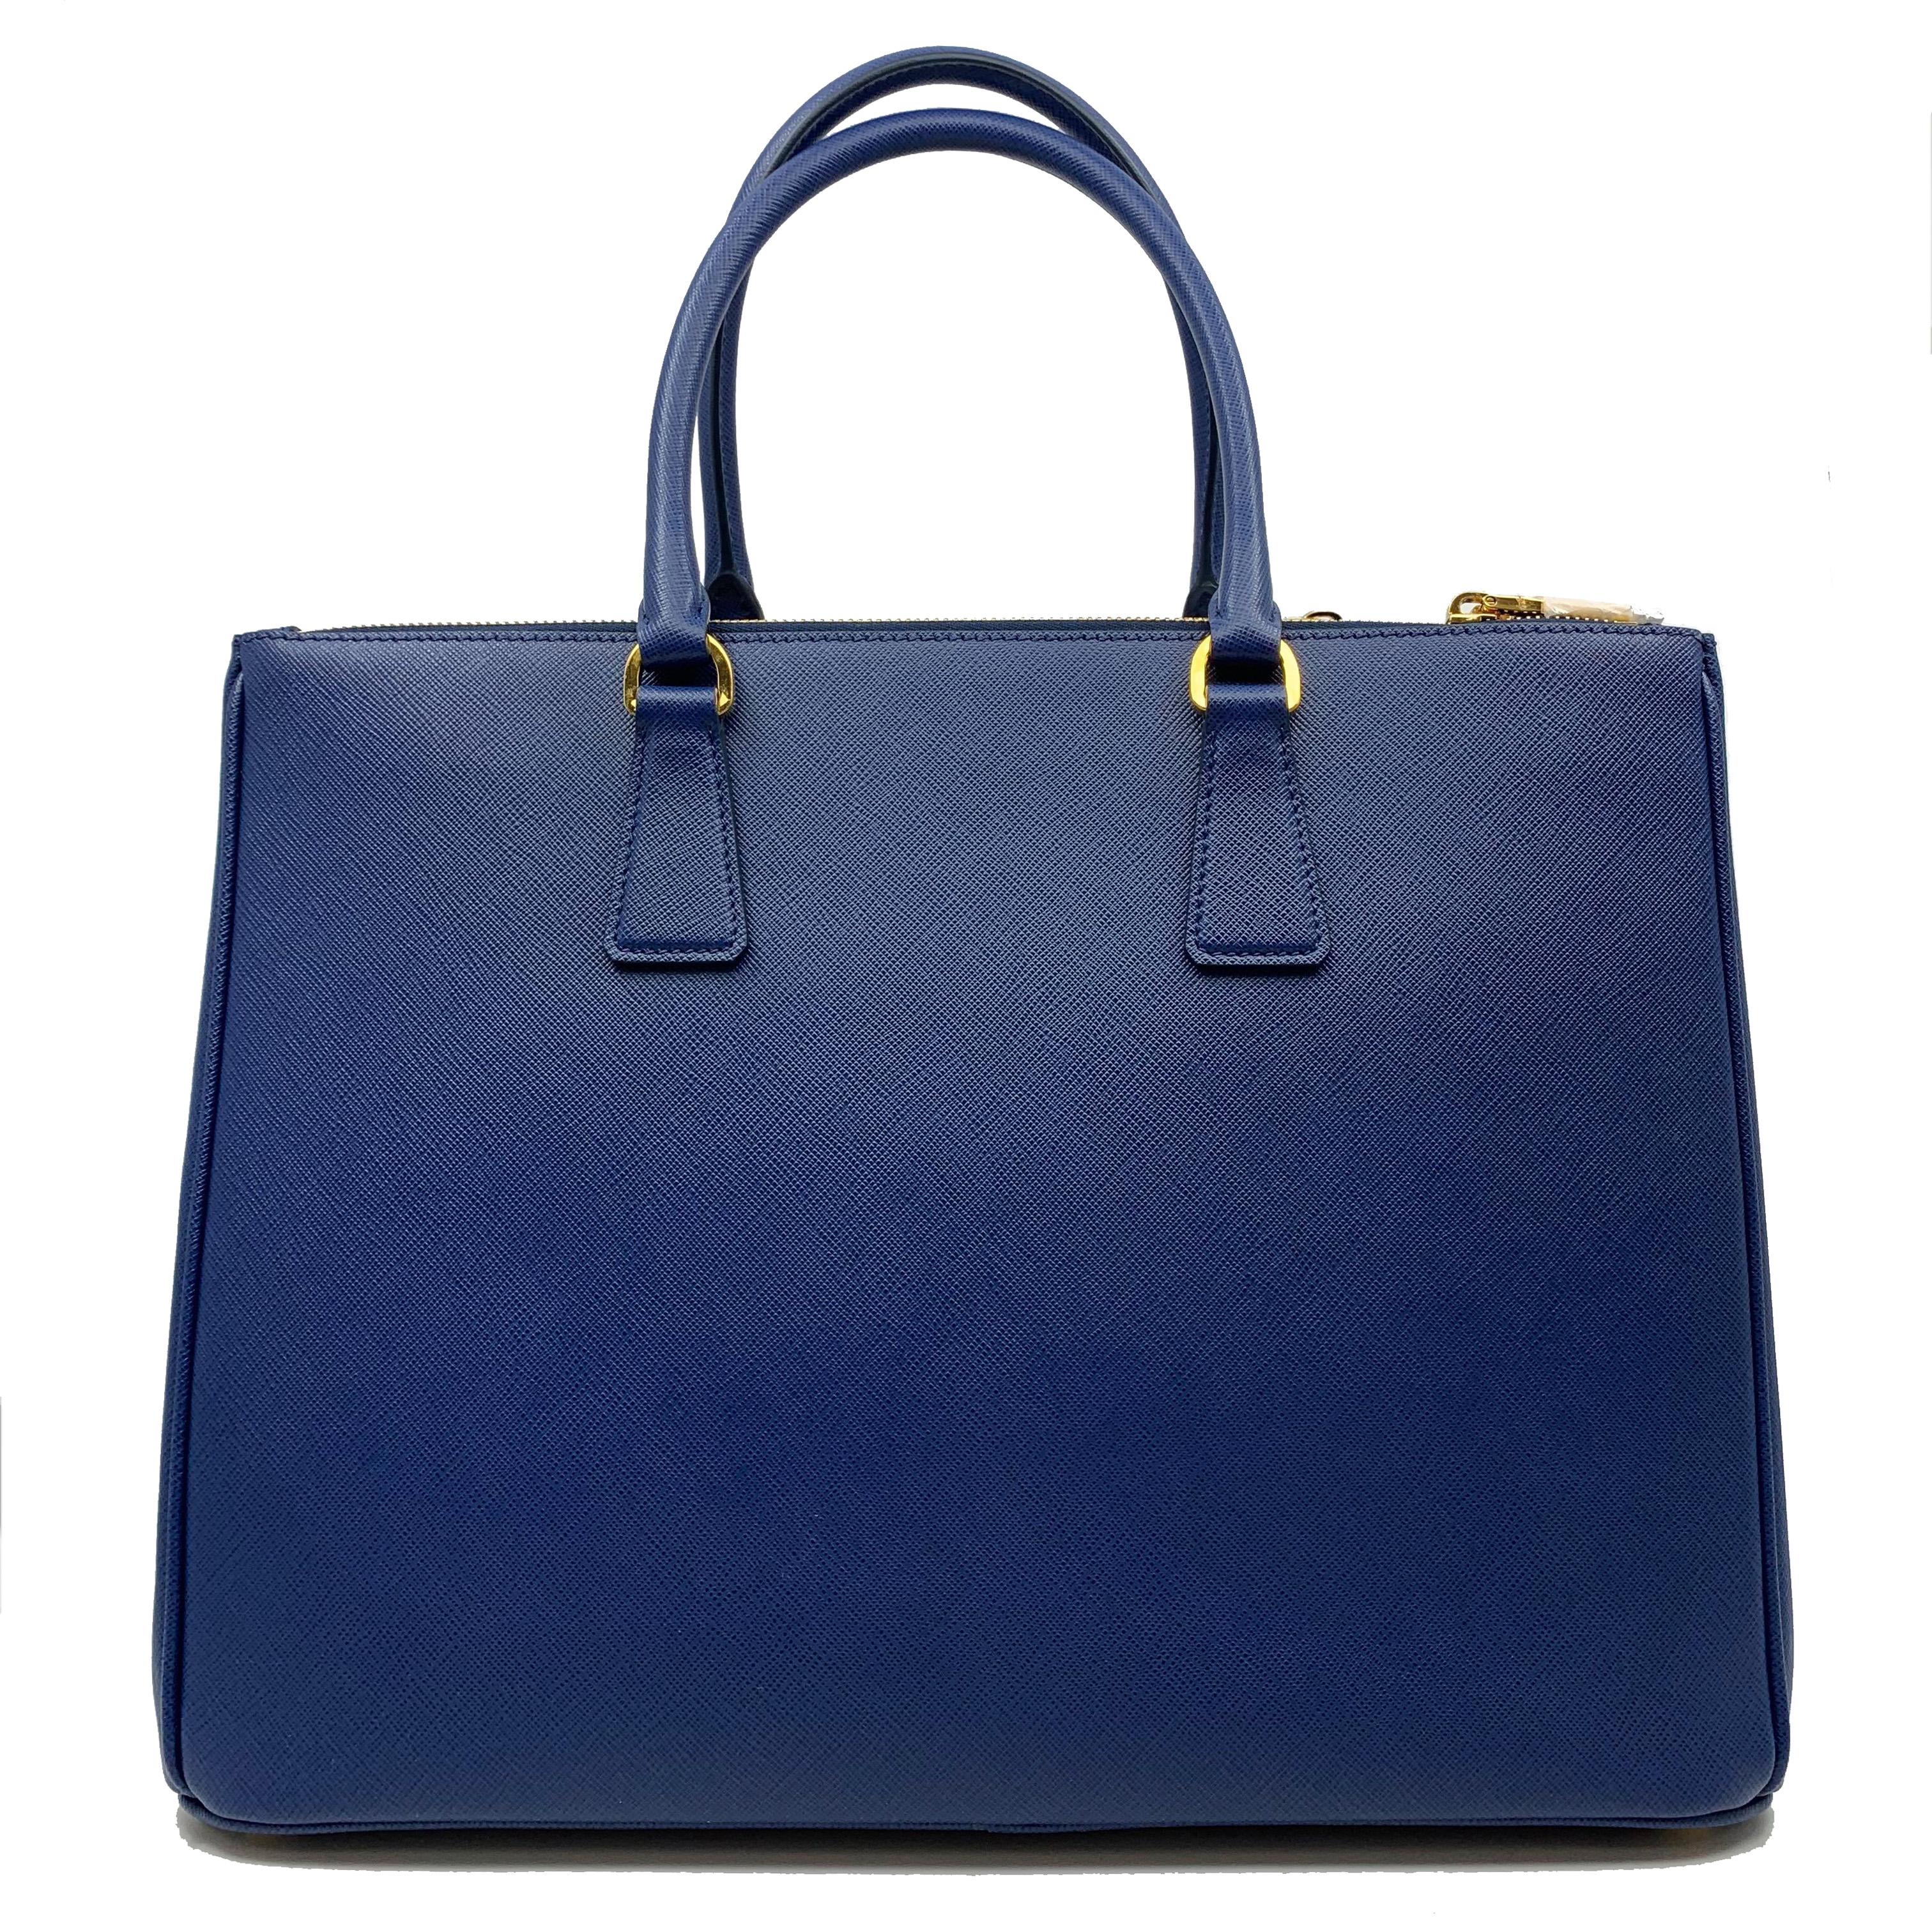 New Without Tags
 Blue Saffiano Calf Leather 
- Double Leather Handle 
- Detachable Key Ring 
- Removable, Adjustable Shoulder Strap 
- Gold-Toned Hardware 
- Triangle Prada Logo with Metal Lettering 
- Expandable Snap Closure on Sides 
- Open Top;